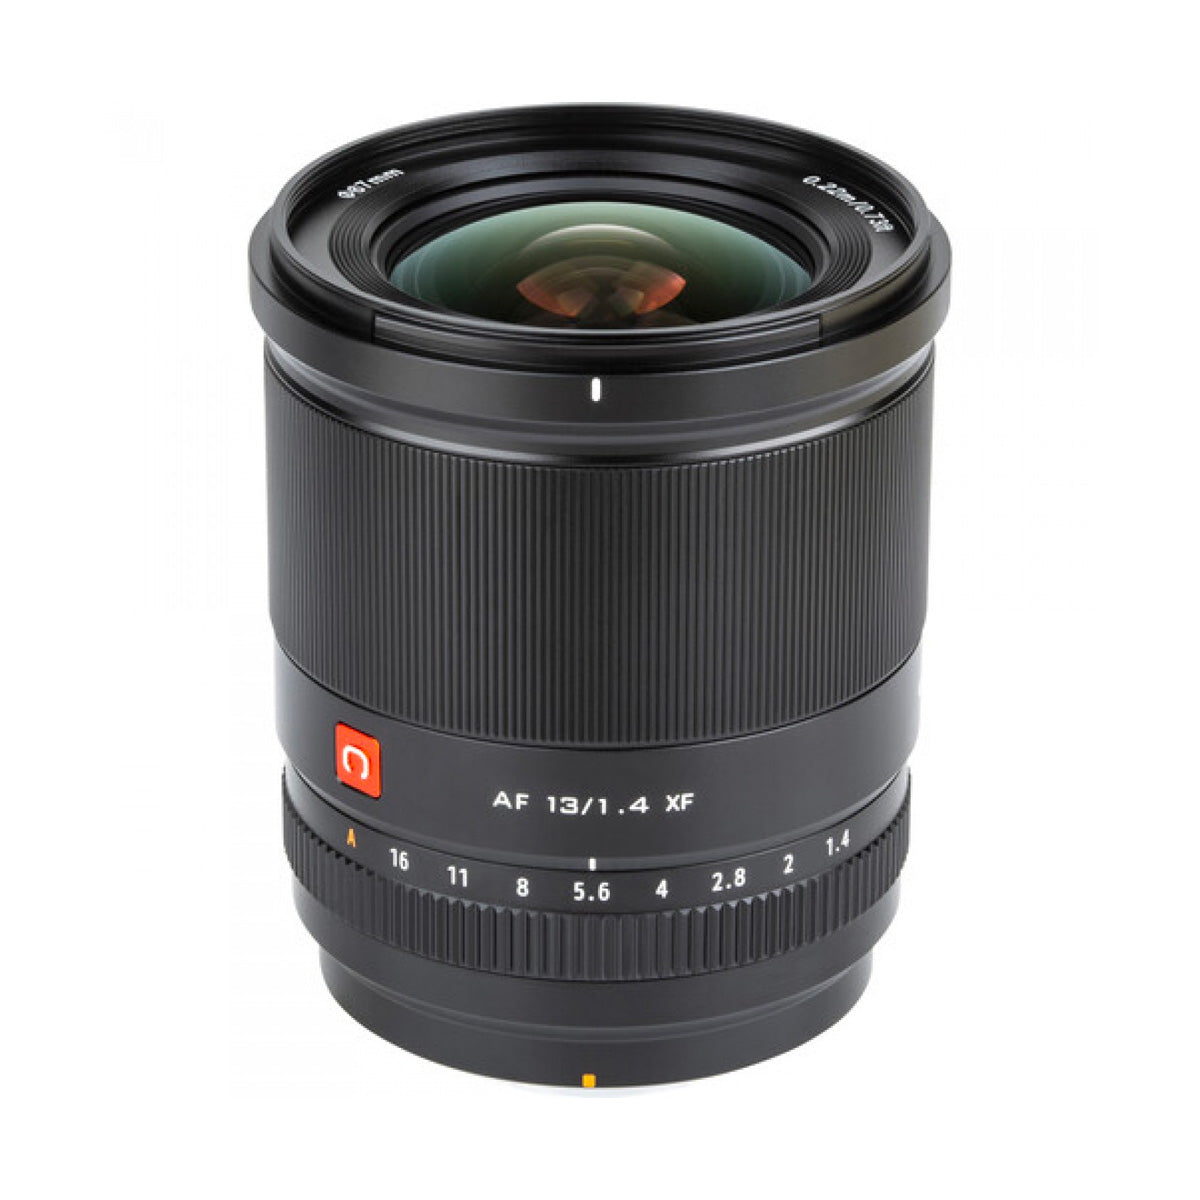 Product photo of the lens standing up with the glass showing